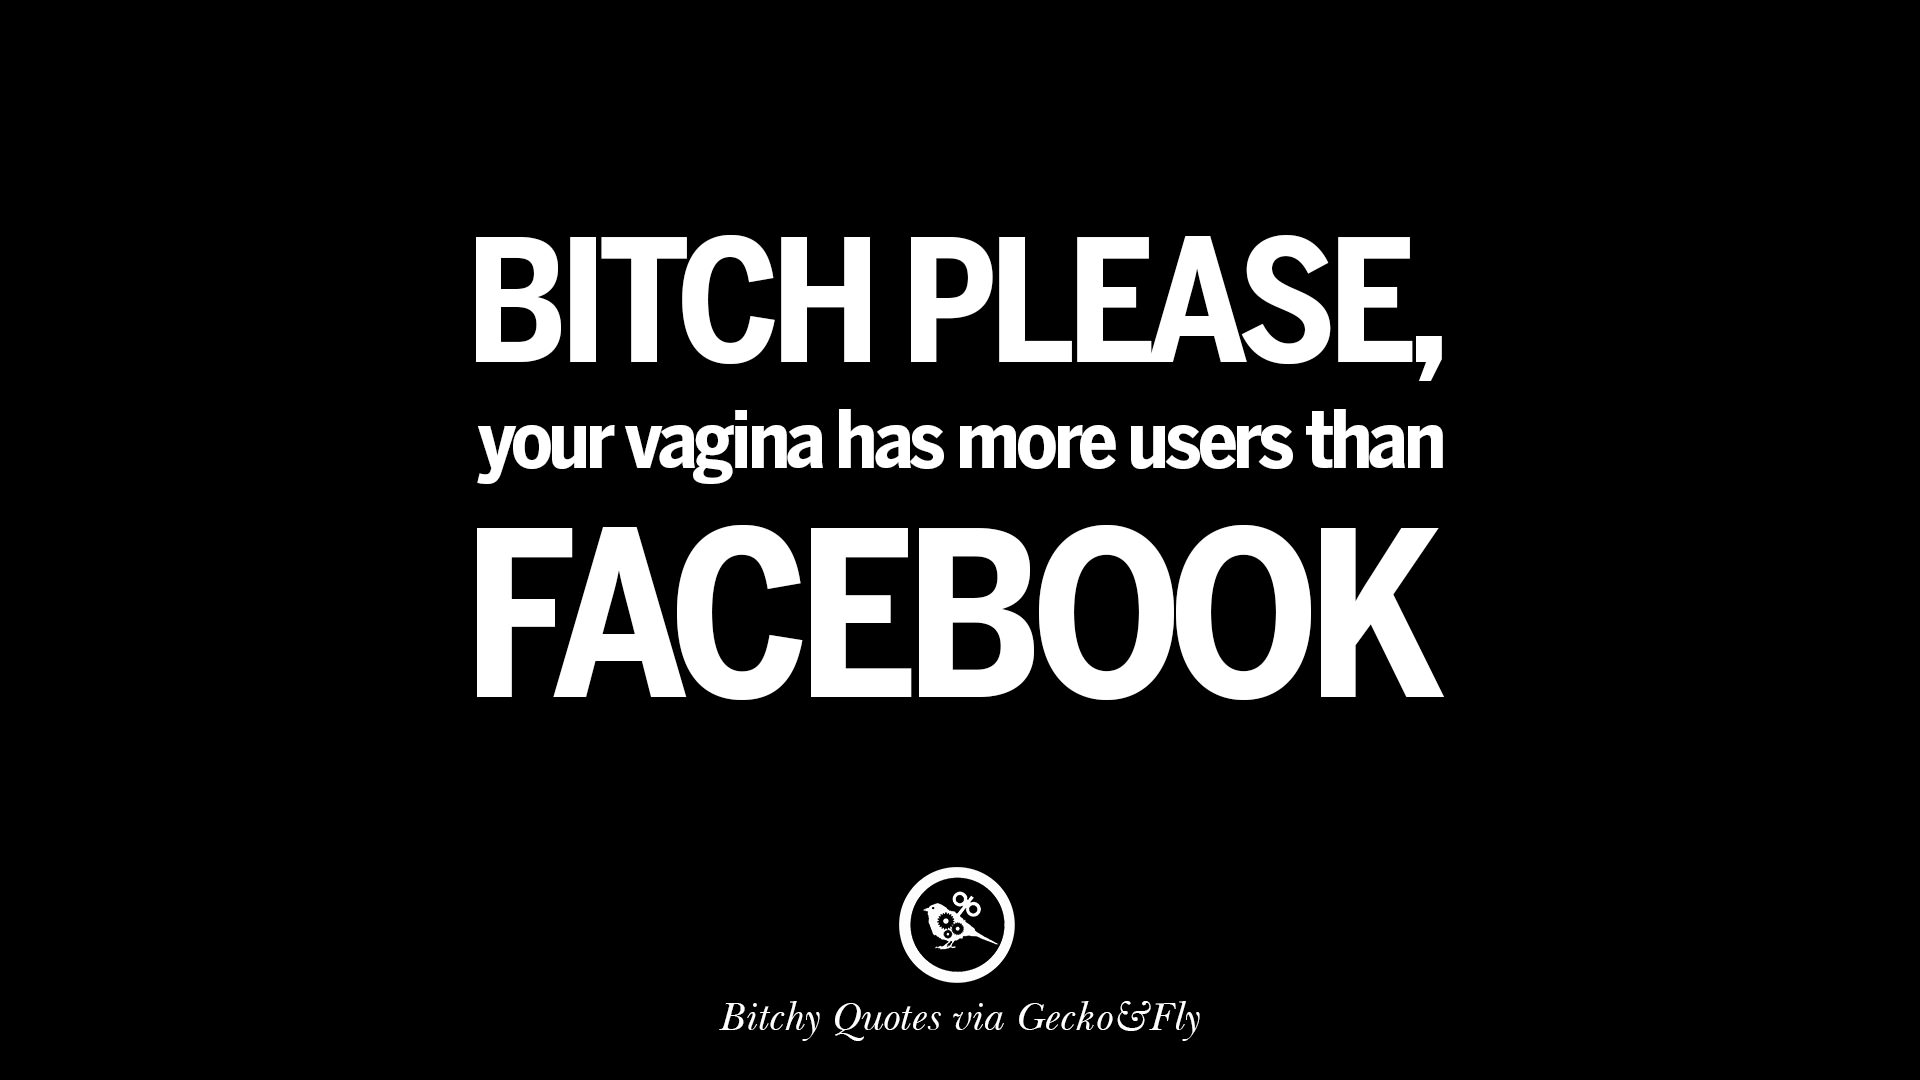 Bitch please your vagina has more users than best tumblr instagram pinterest inspiring